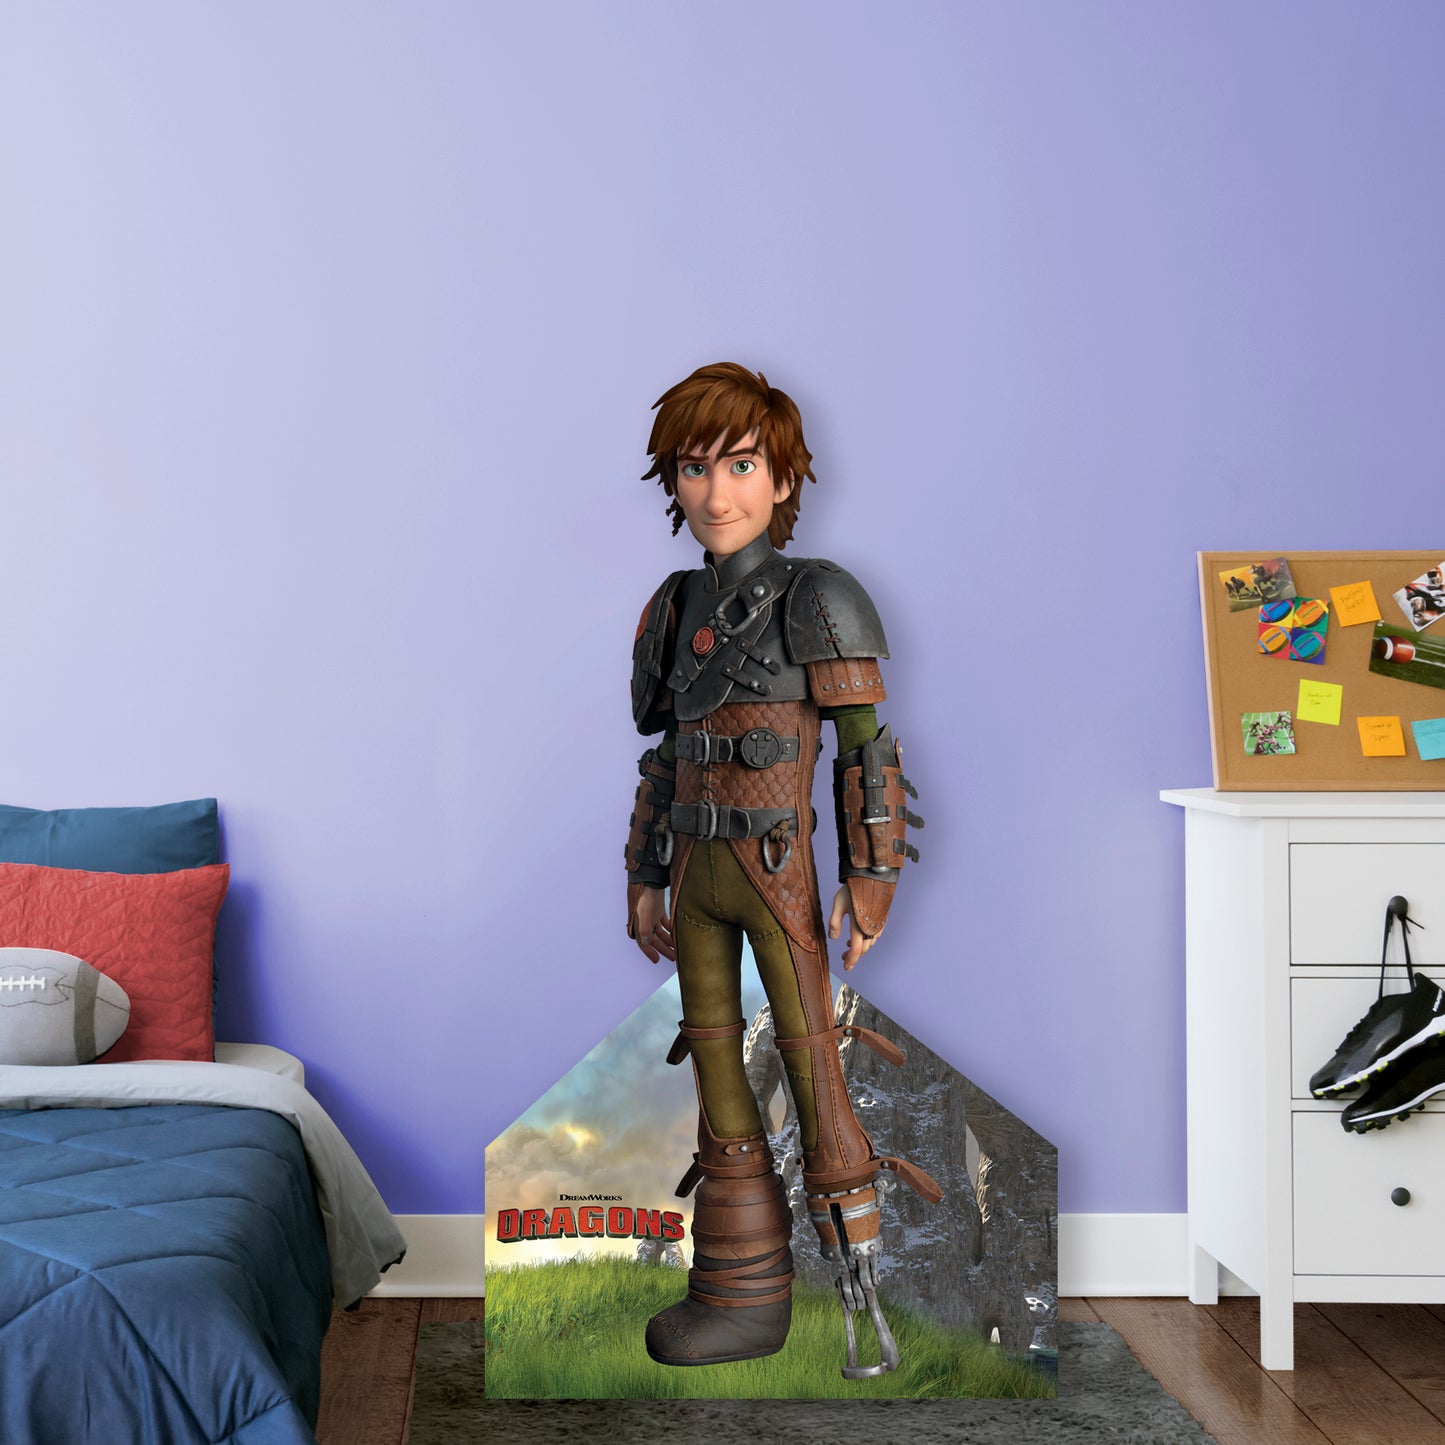 How to Train Your Dragon:  Life-Size   Foam Core Cutout  - Officially Licensed NBC Universal    Stand Out